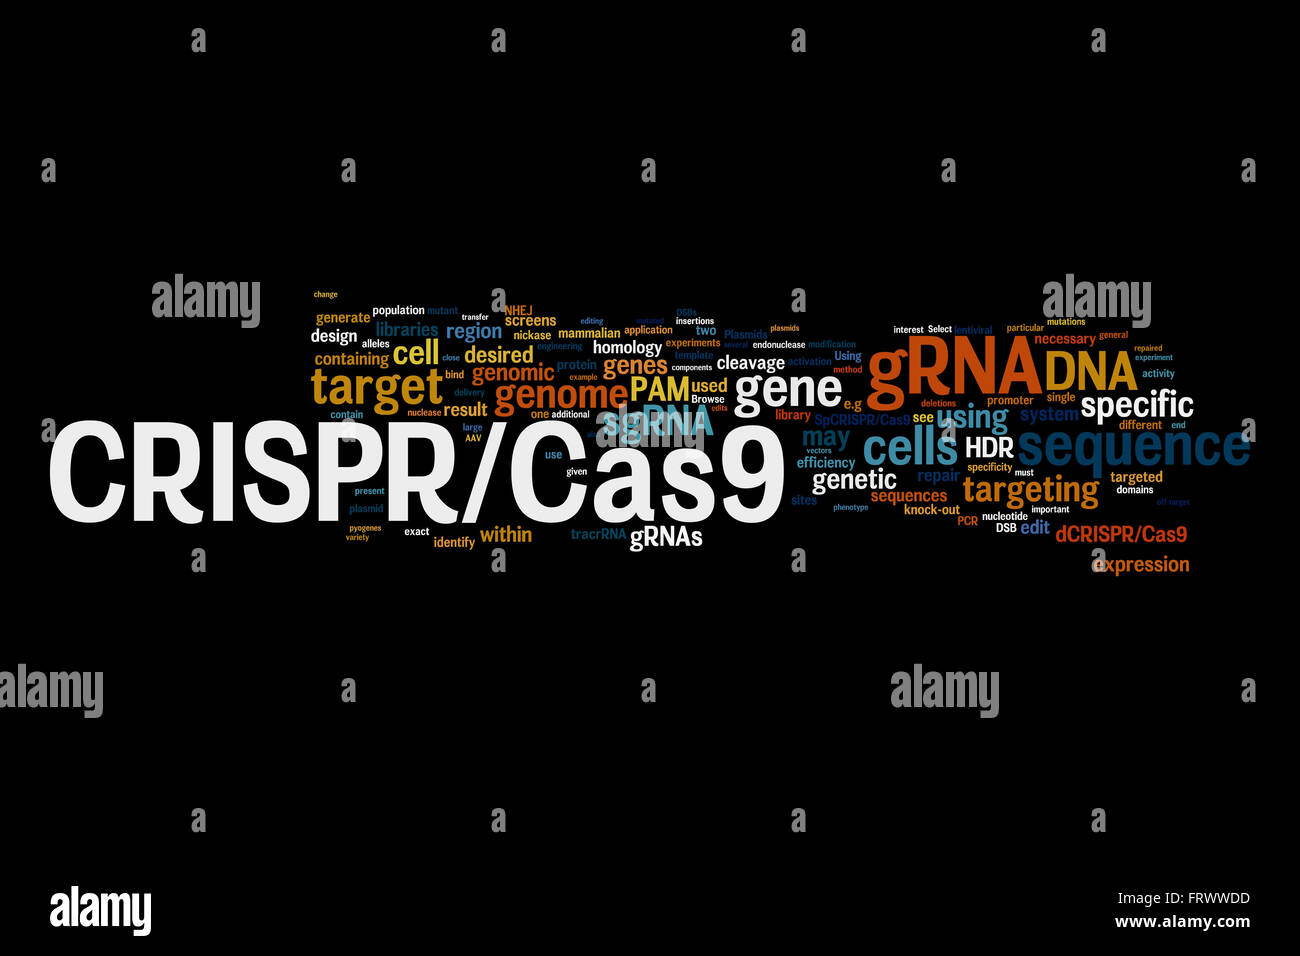 CRISPR/Cas9 system for editing, regulating and targeting genomes (biotechnology and genetic engineering) word cloud Stock Photo